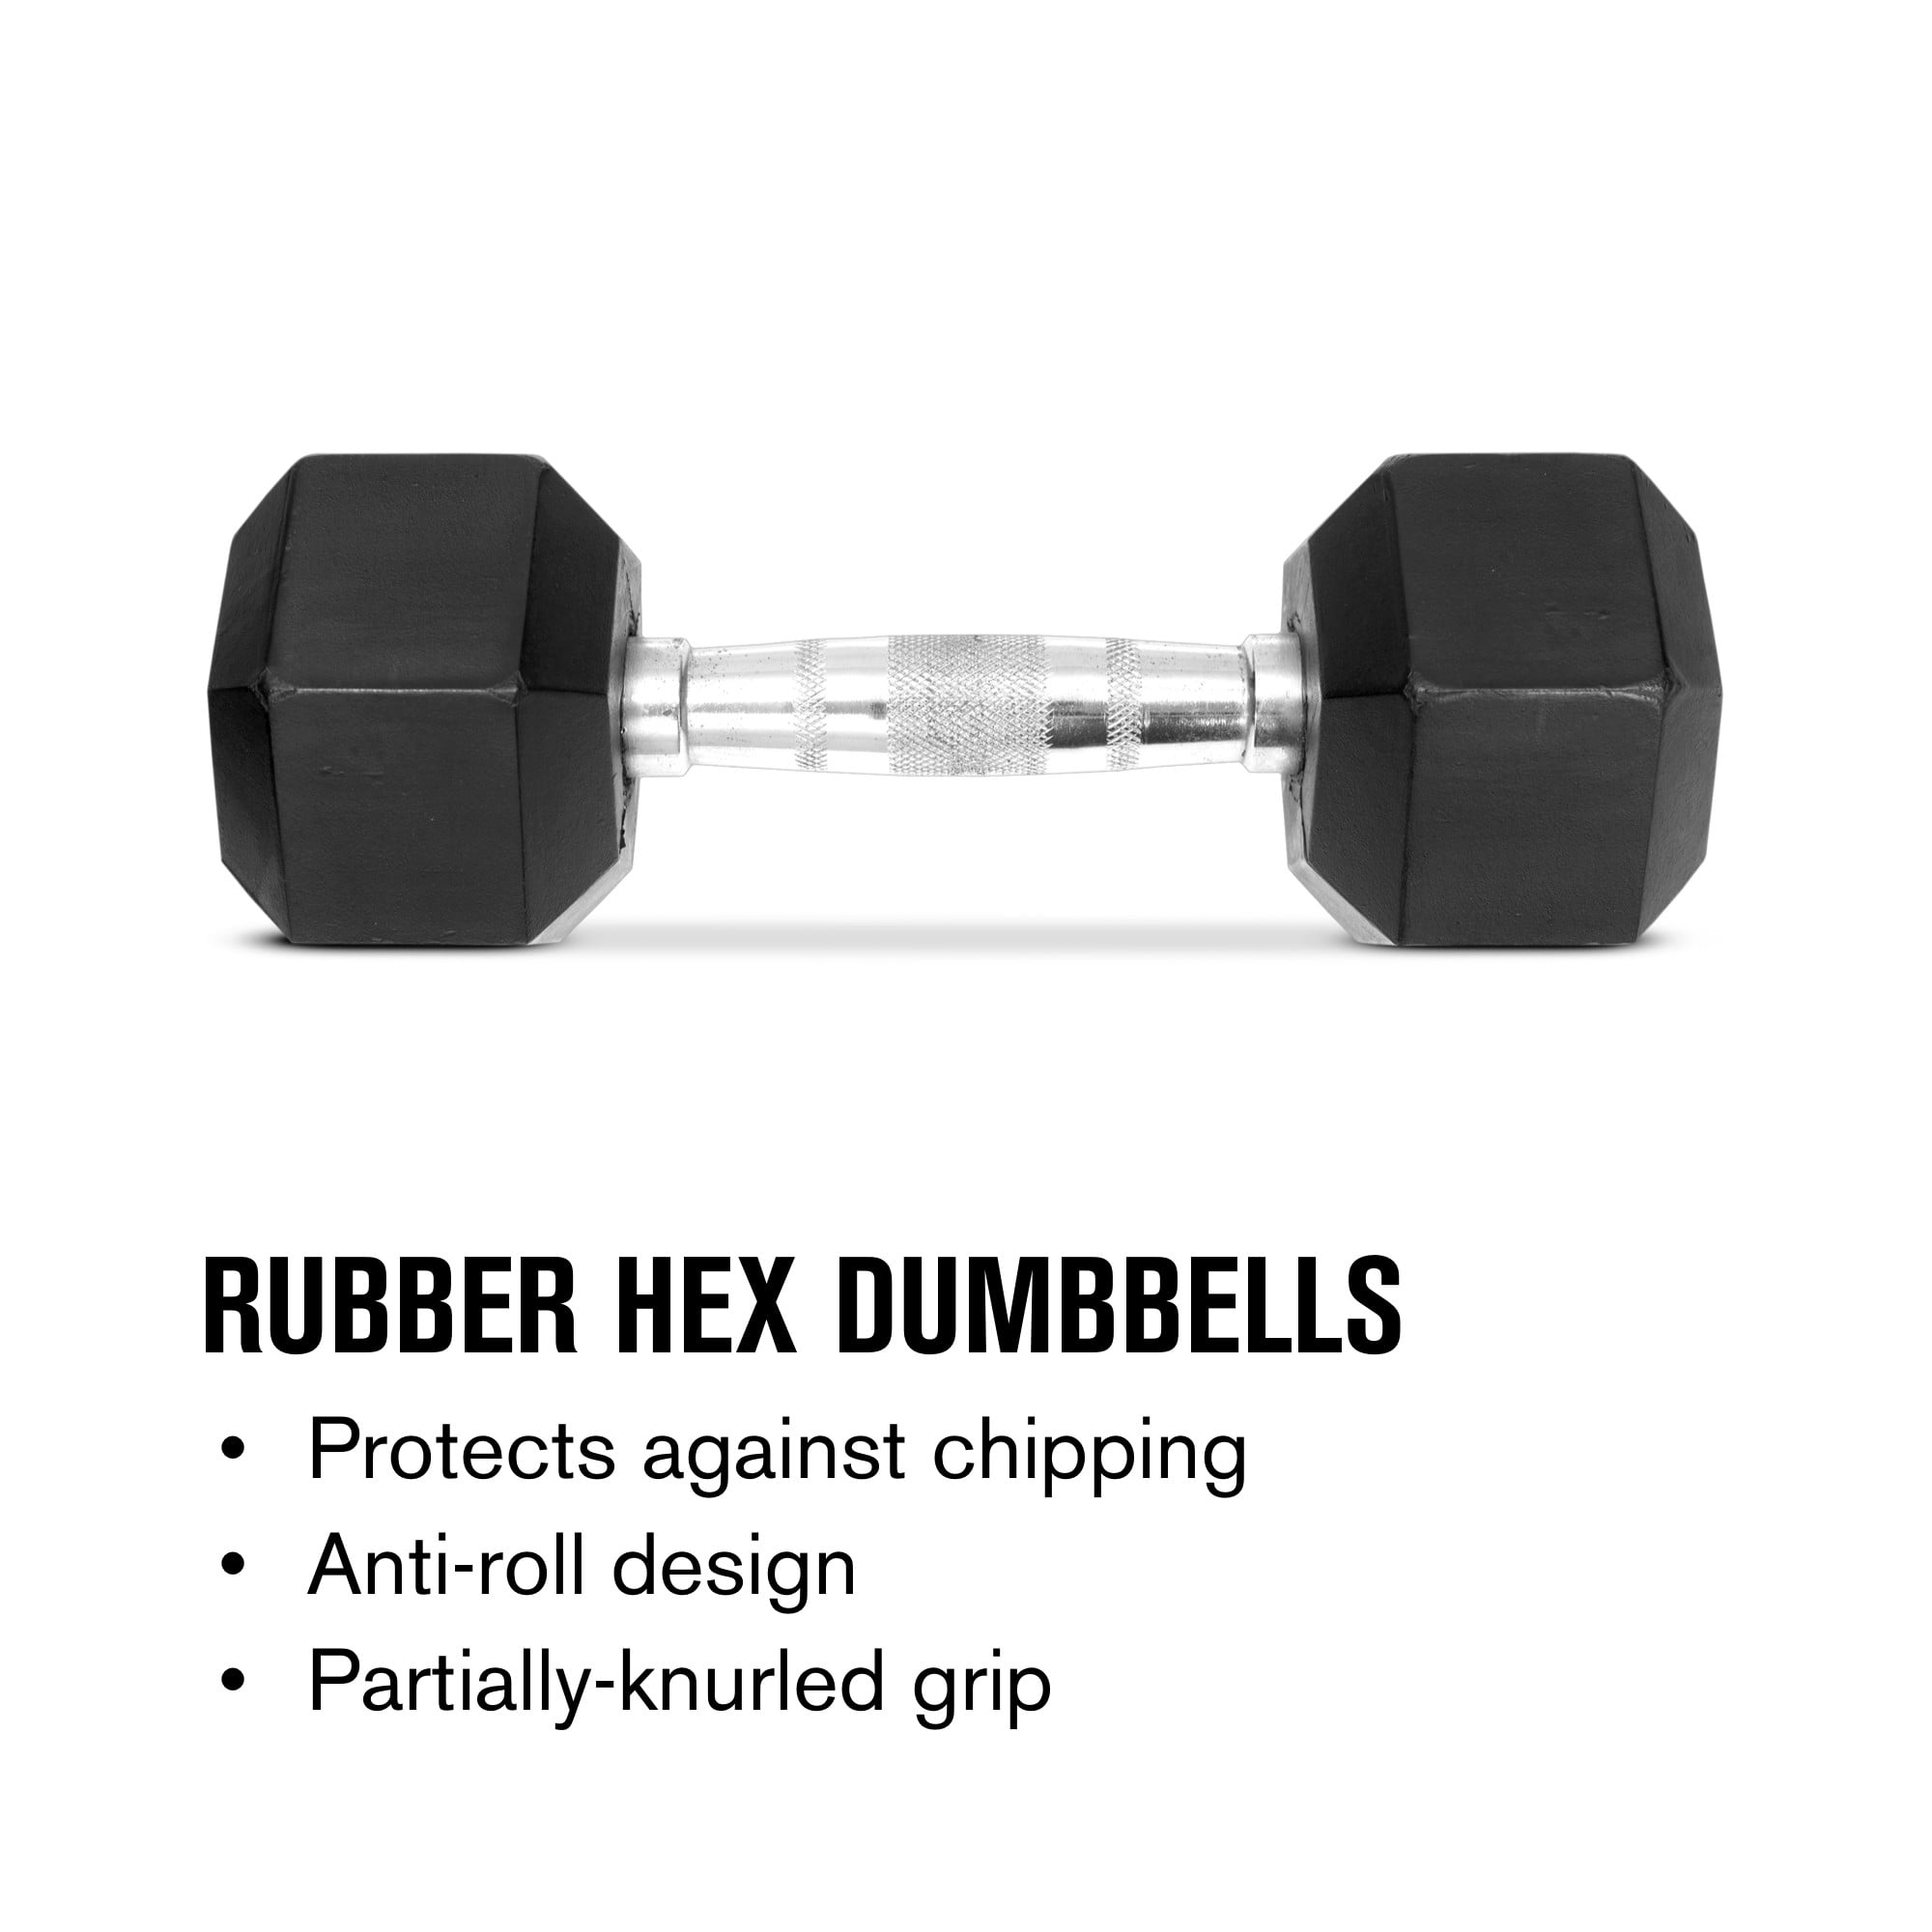 Weider 35lb Rubber Hex Dumbbells Set Of 2 70 lbs Total Brand New Ships Fast 